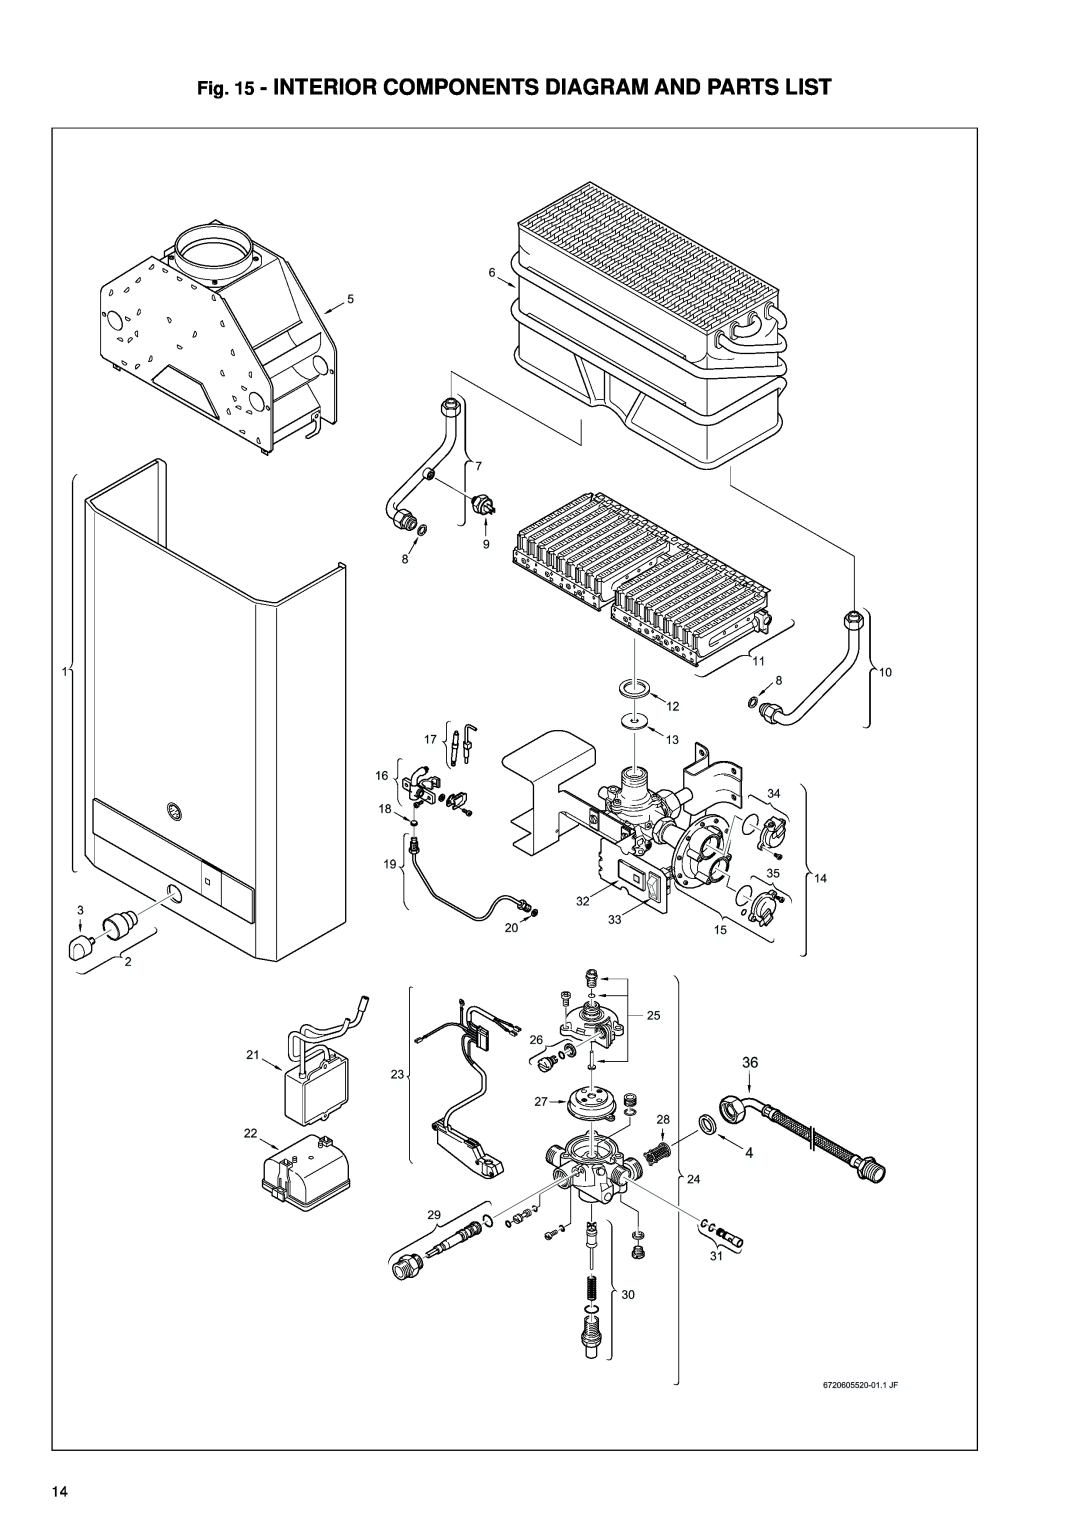 Bosch Appliances 125X NG, 125X LP specifications Interior Components Diagram And Parts List 